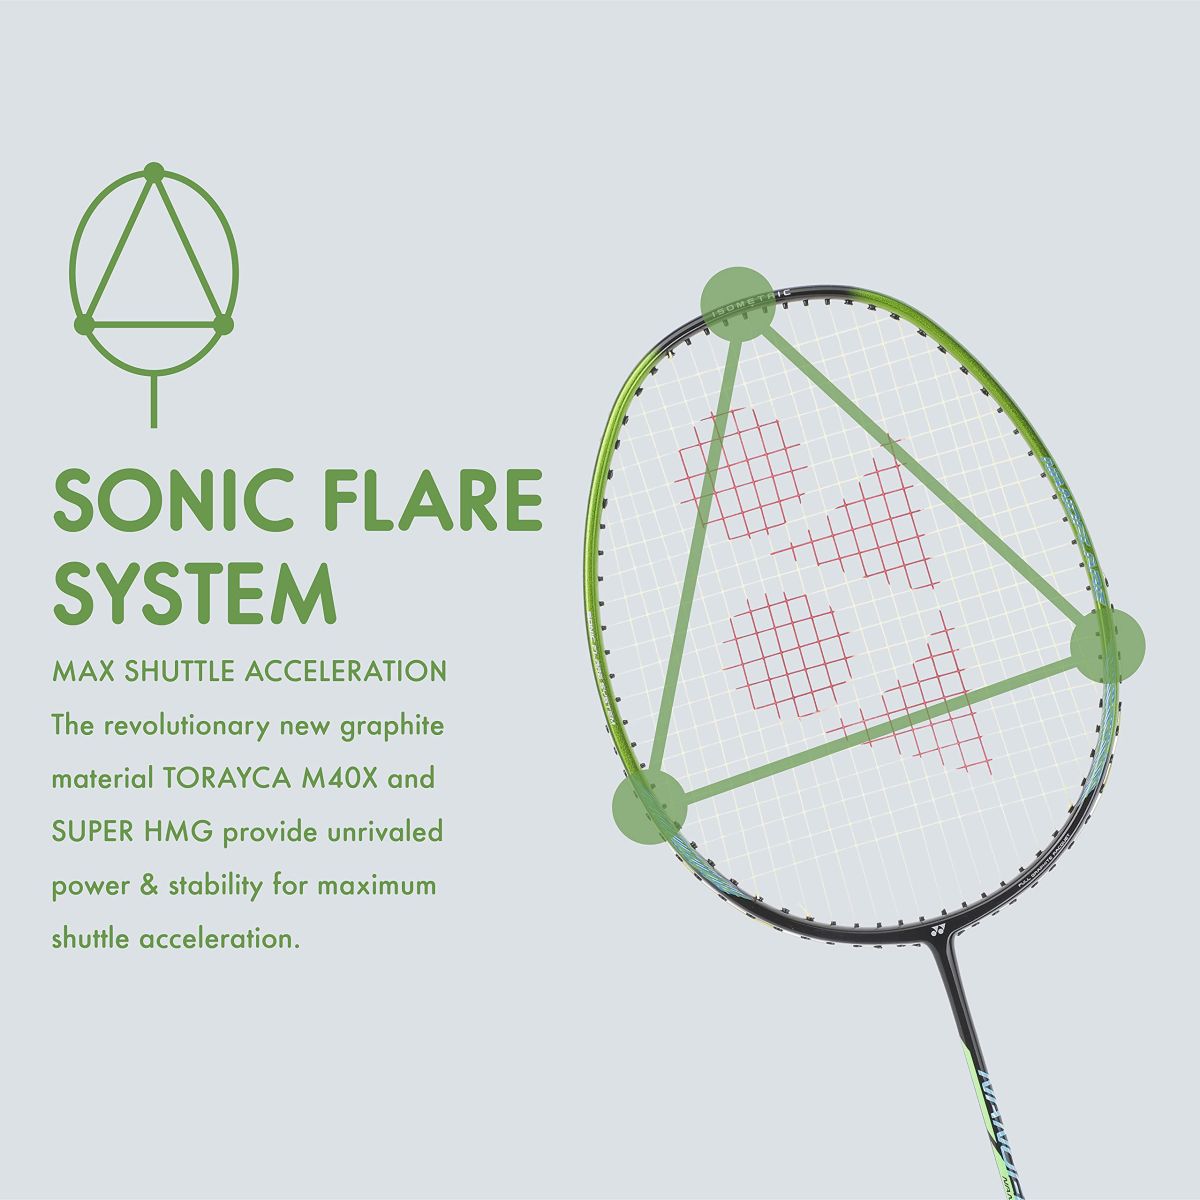 cong-nghe-sonic-flare-system